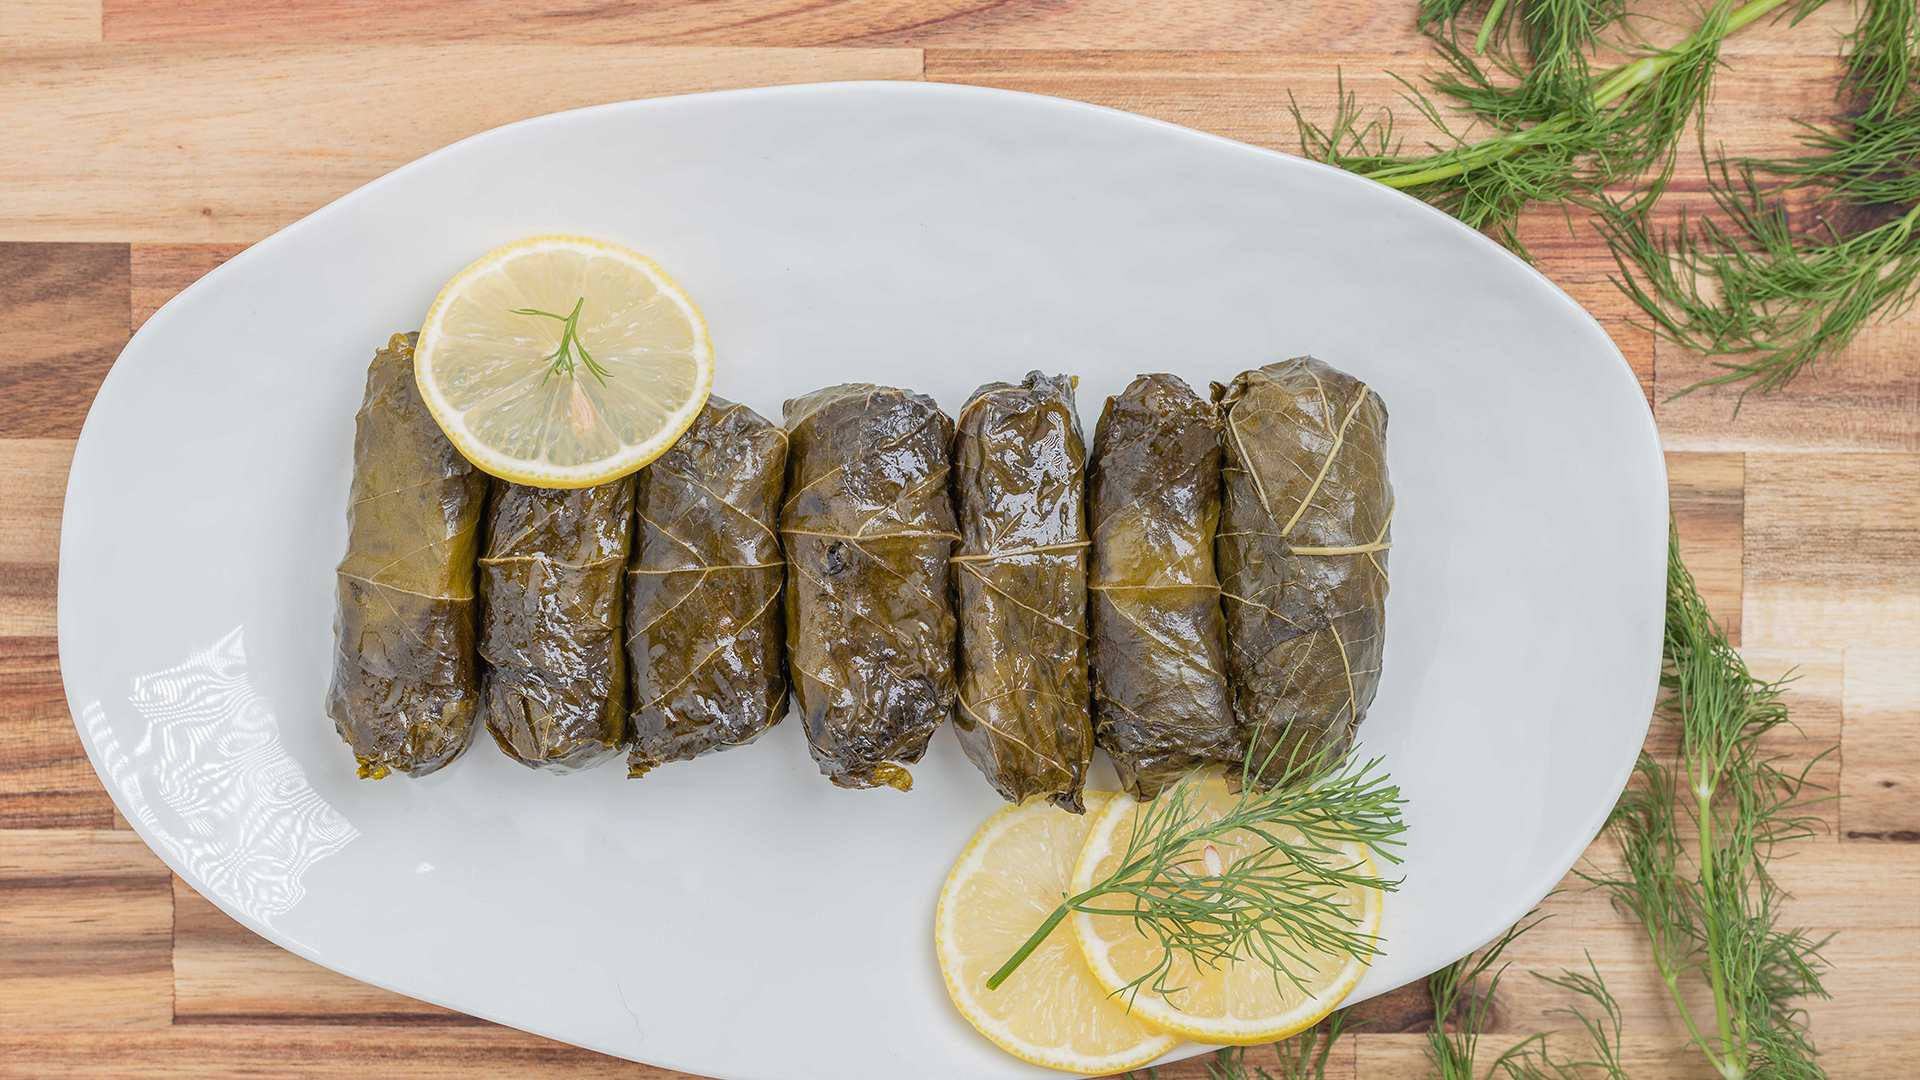 Wild rice and caramelized onion dolmades